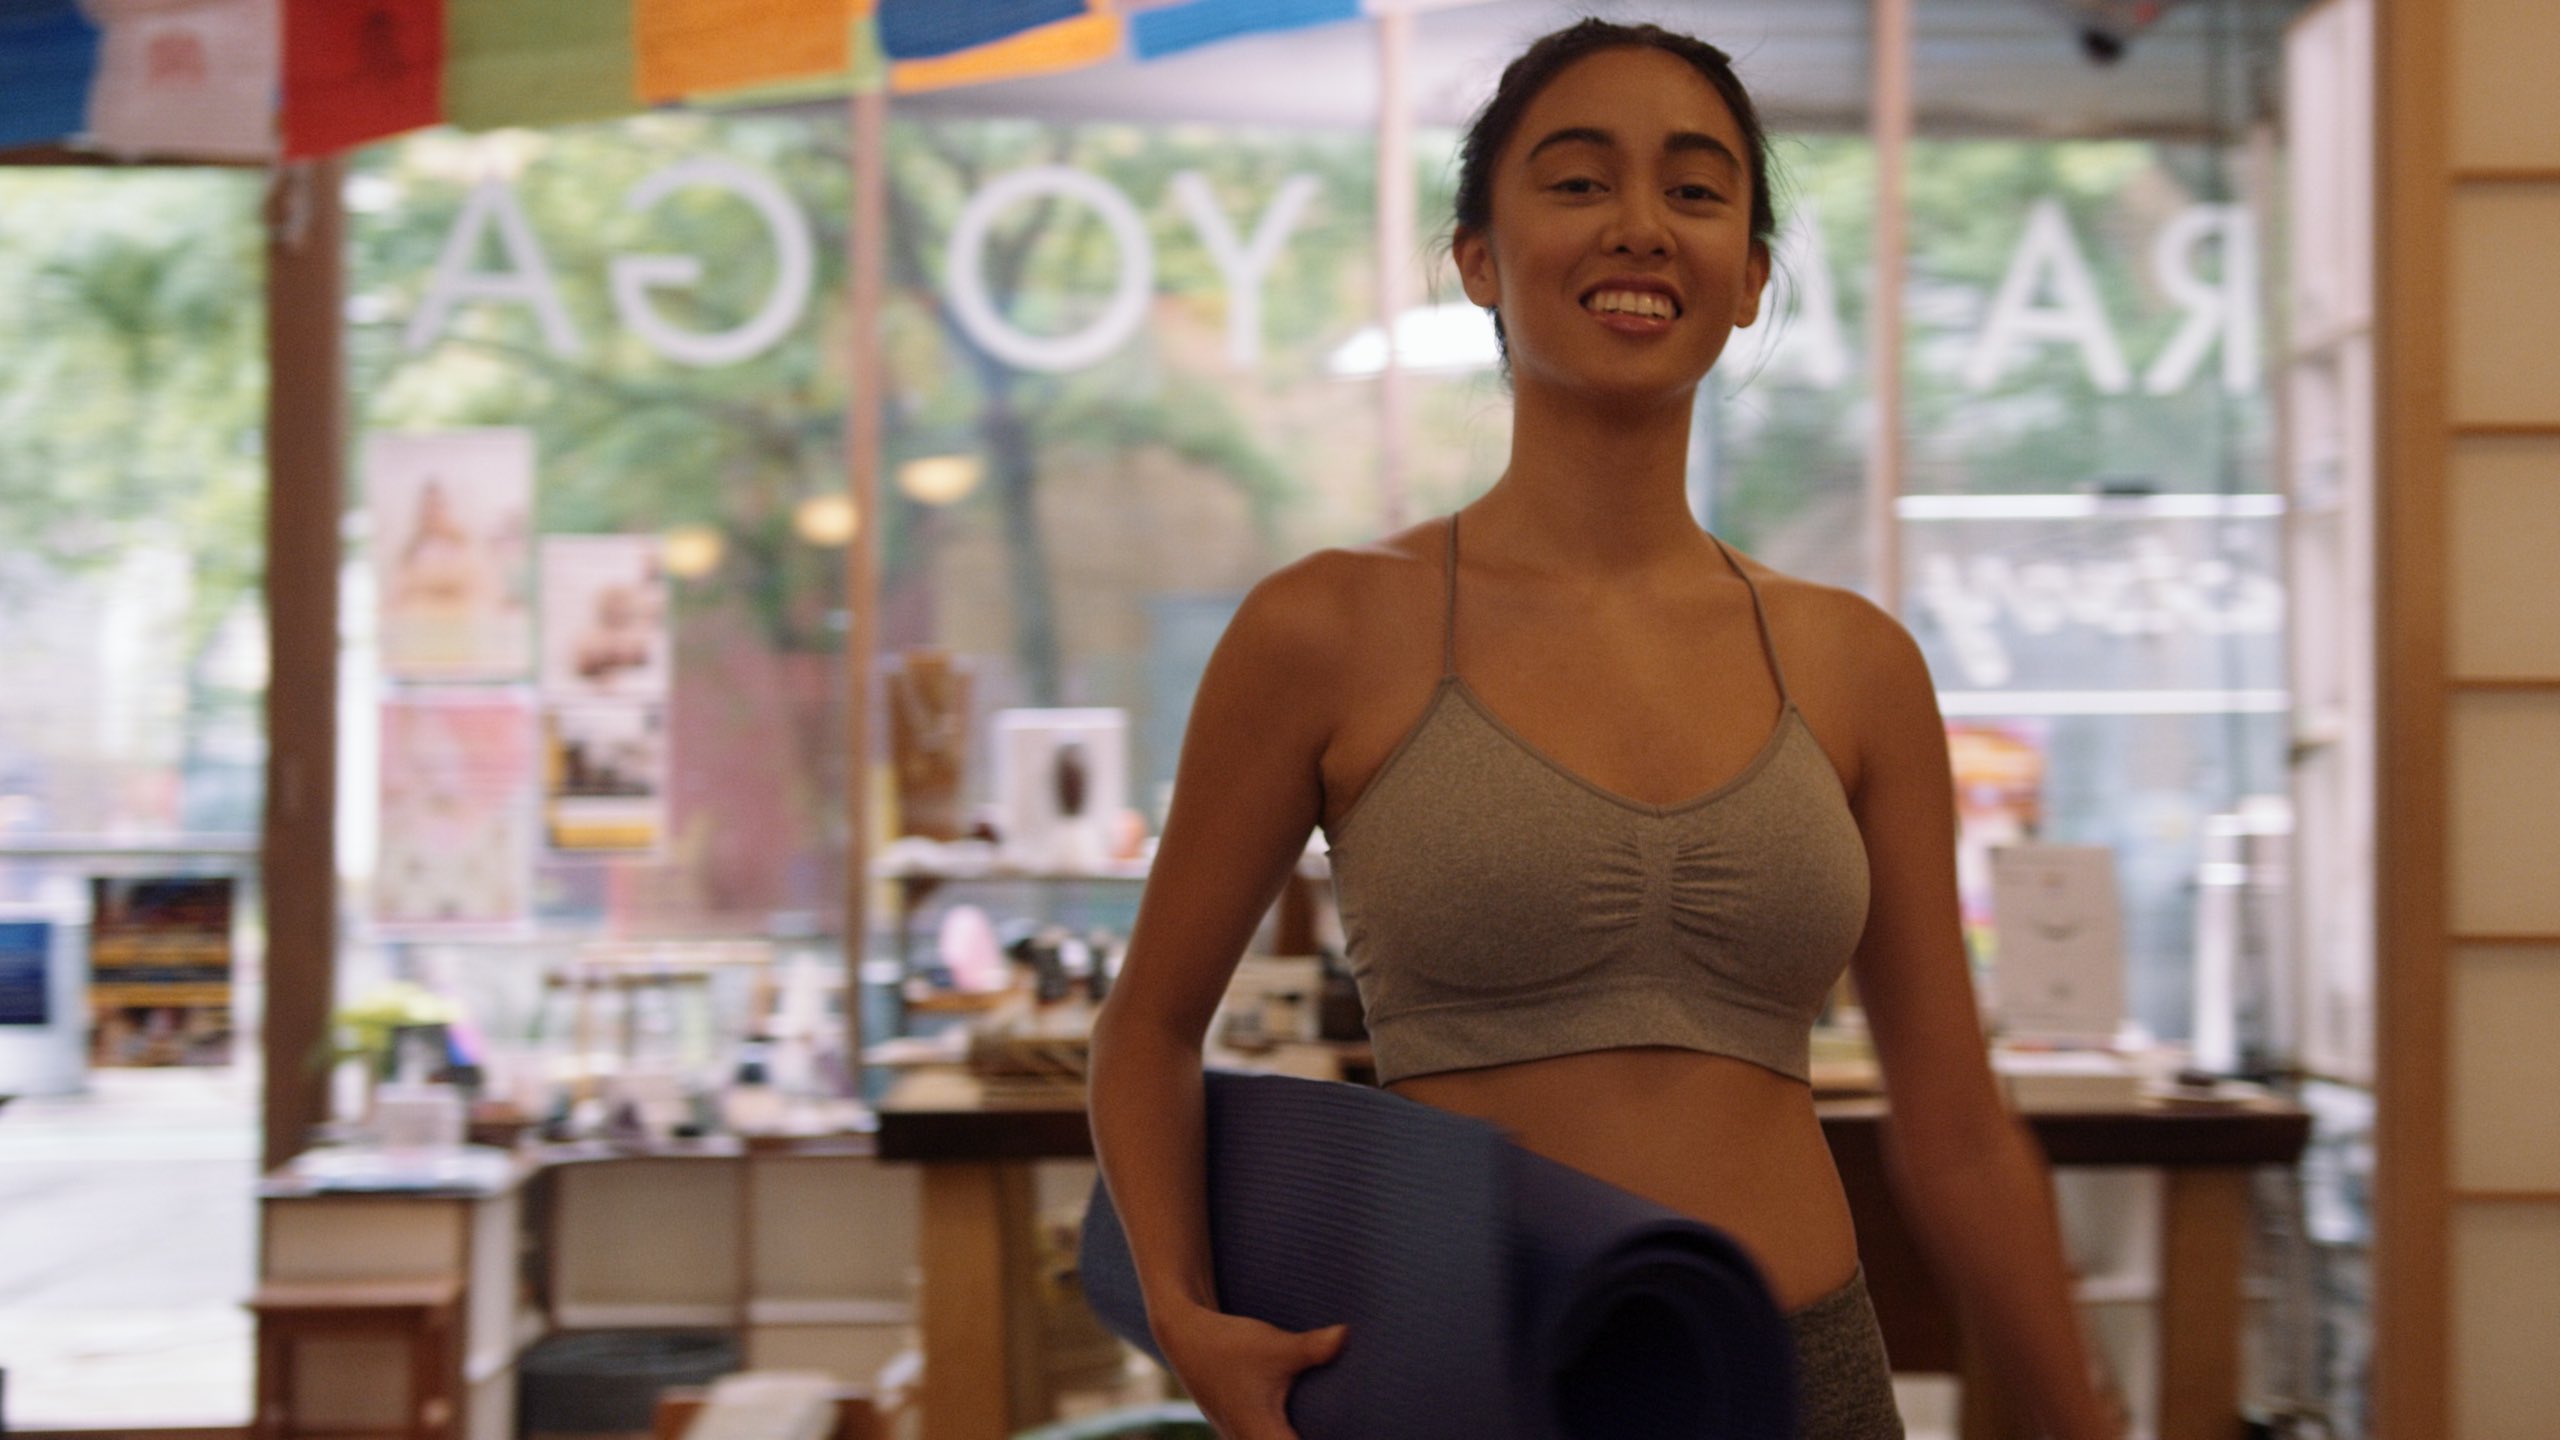 Apples & Oranges Woman wearing a gray sports bra top holding a yoga mat smiling for the camera